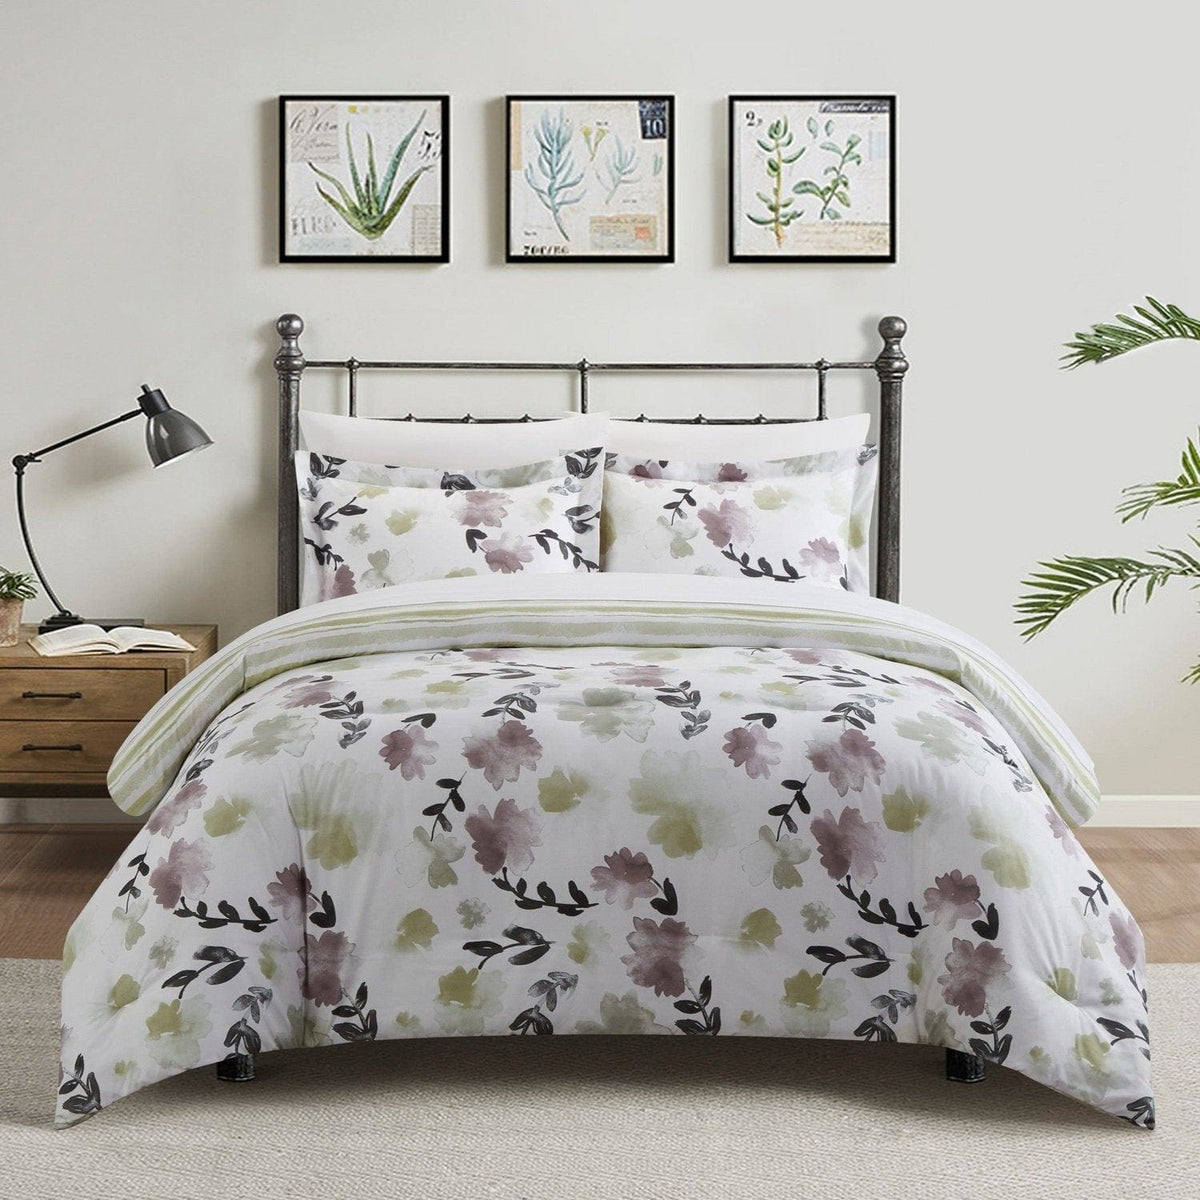 Chic Home Everly Green 7 Piece Reversible Watercolor Floral Print Duvet Cover Set Green